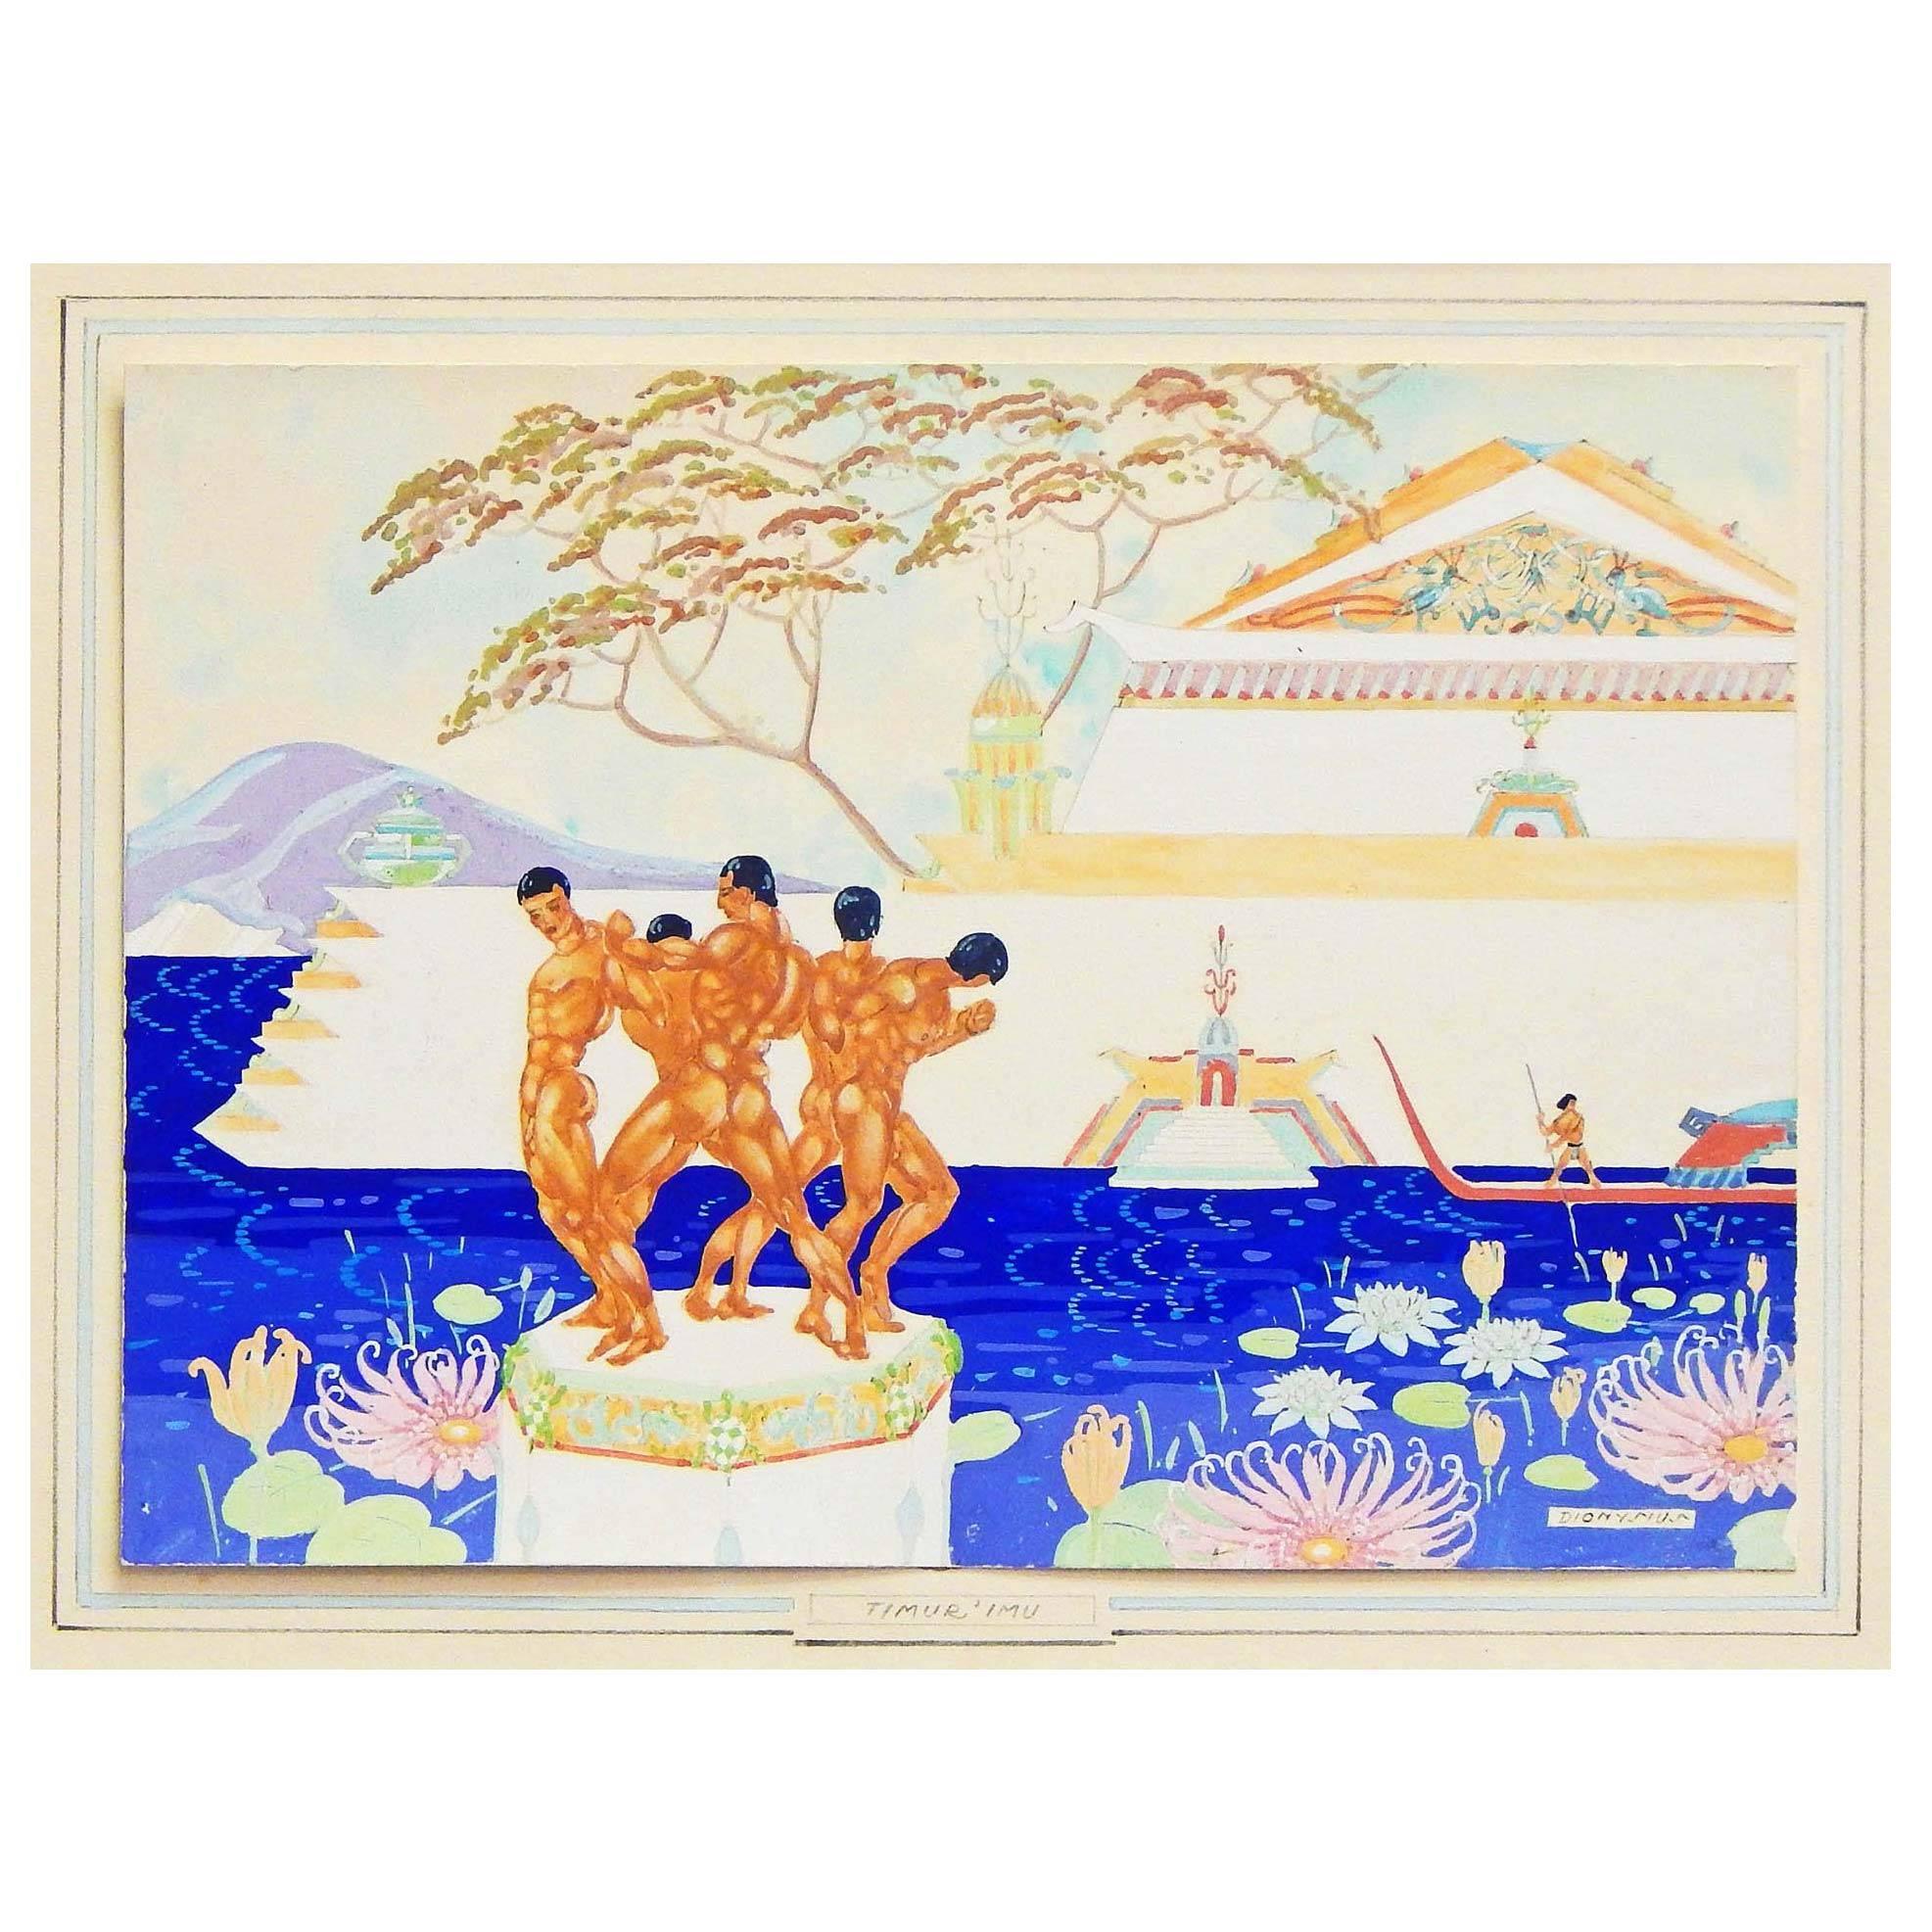 "Timur 'Imu, " Exotic Asian Fantasy, Art Deco Painting with Male Nudes